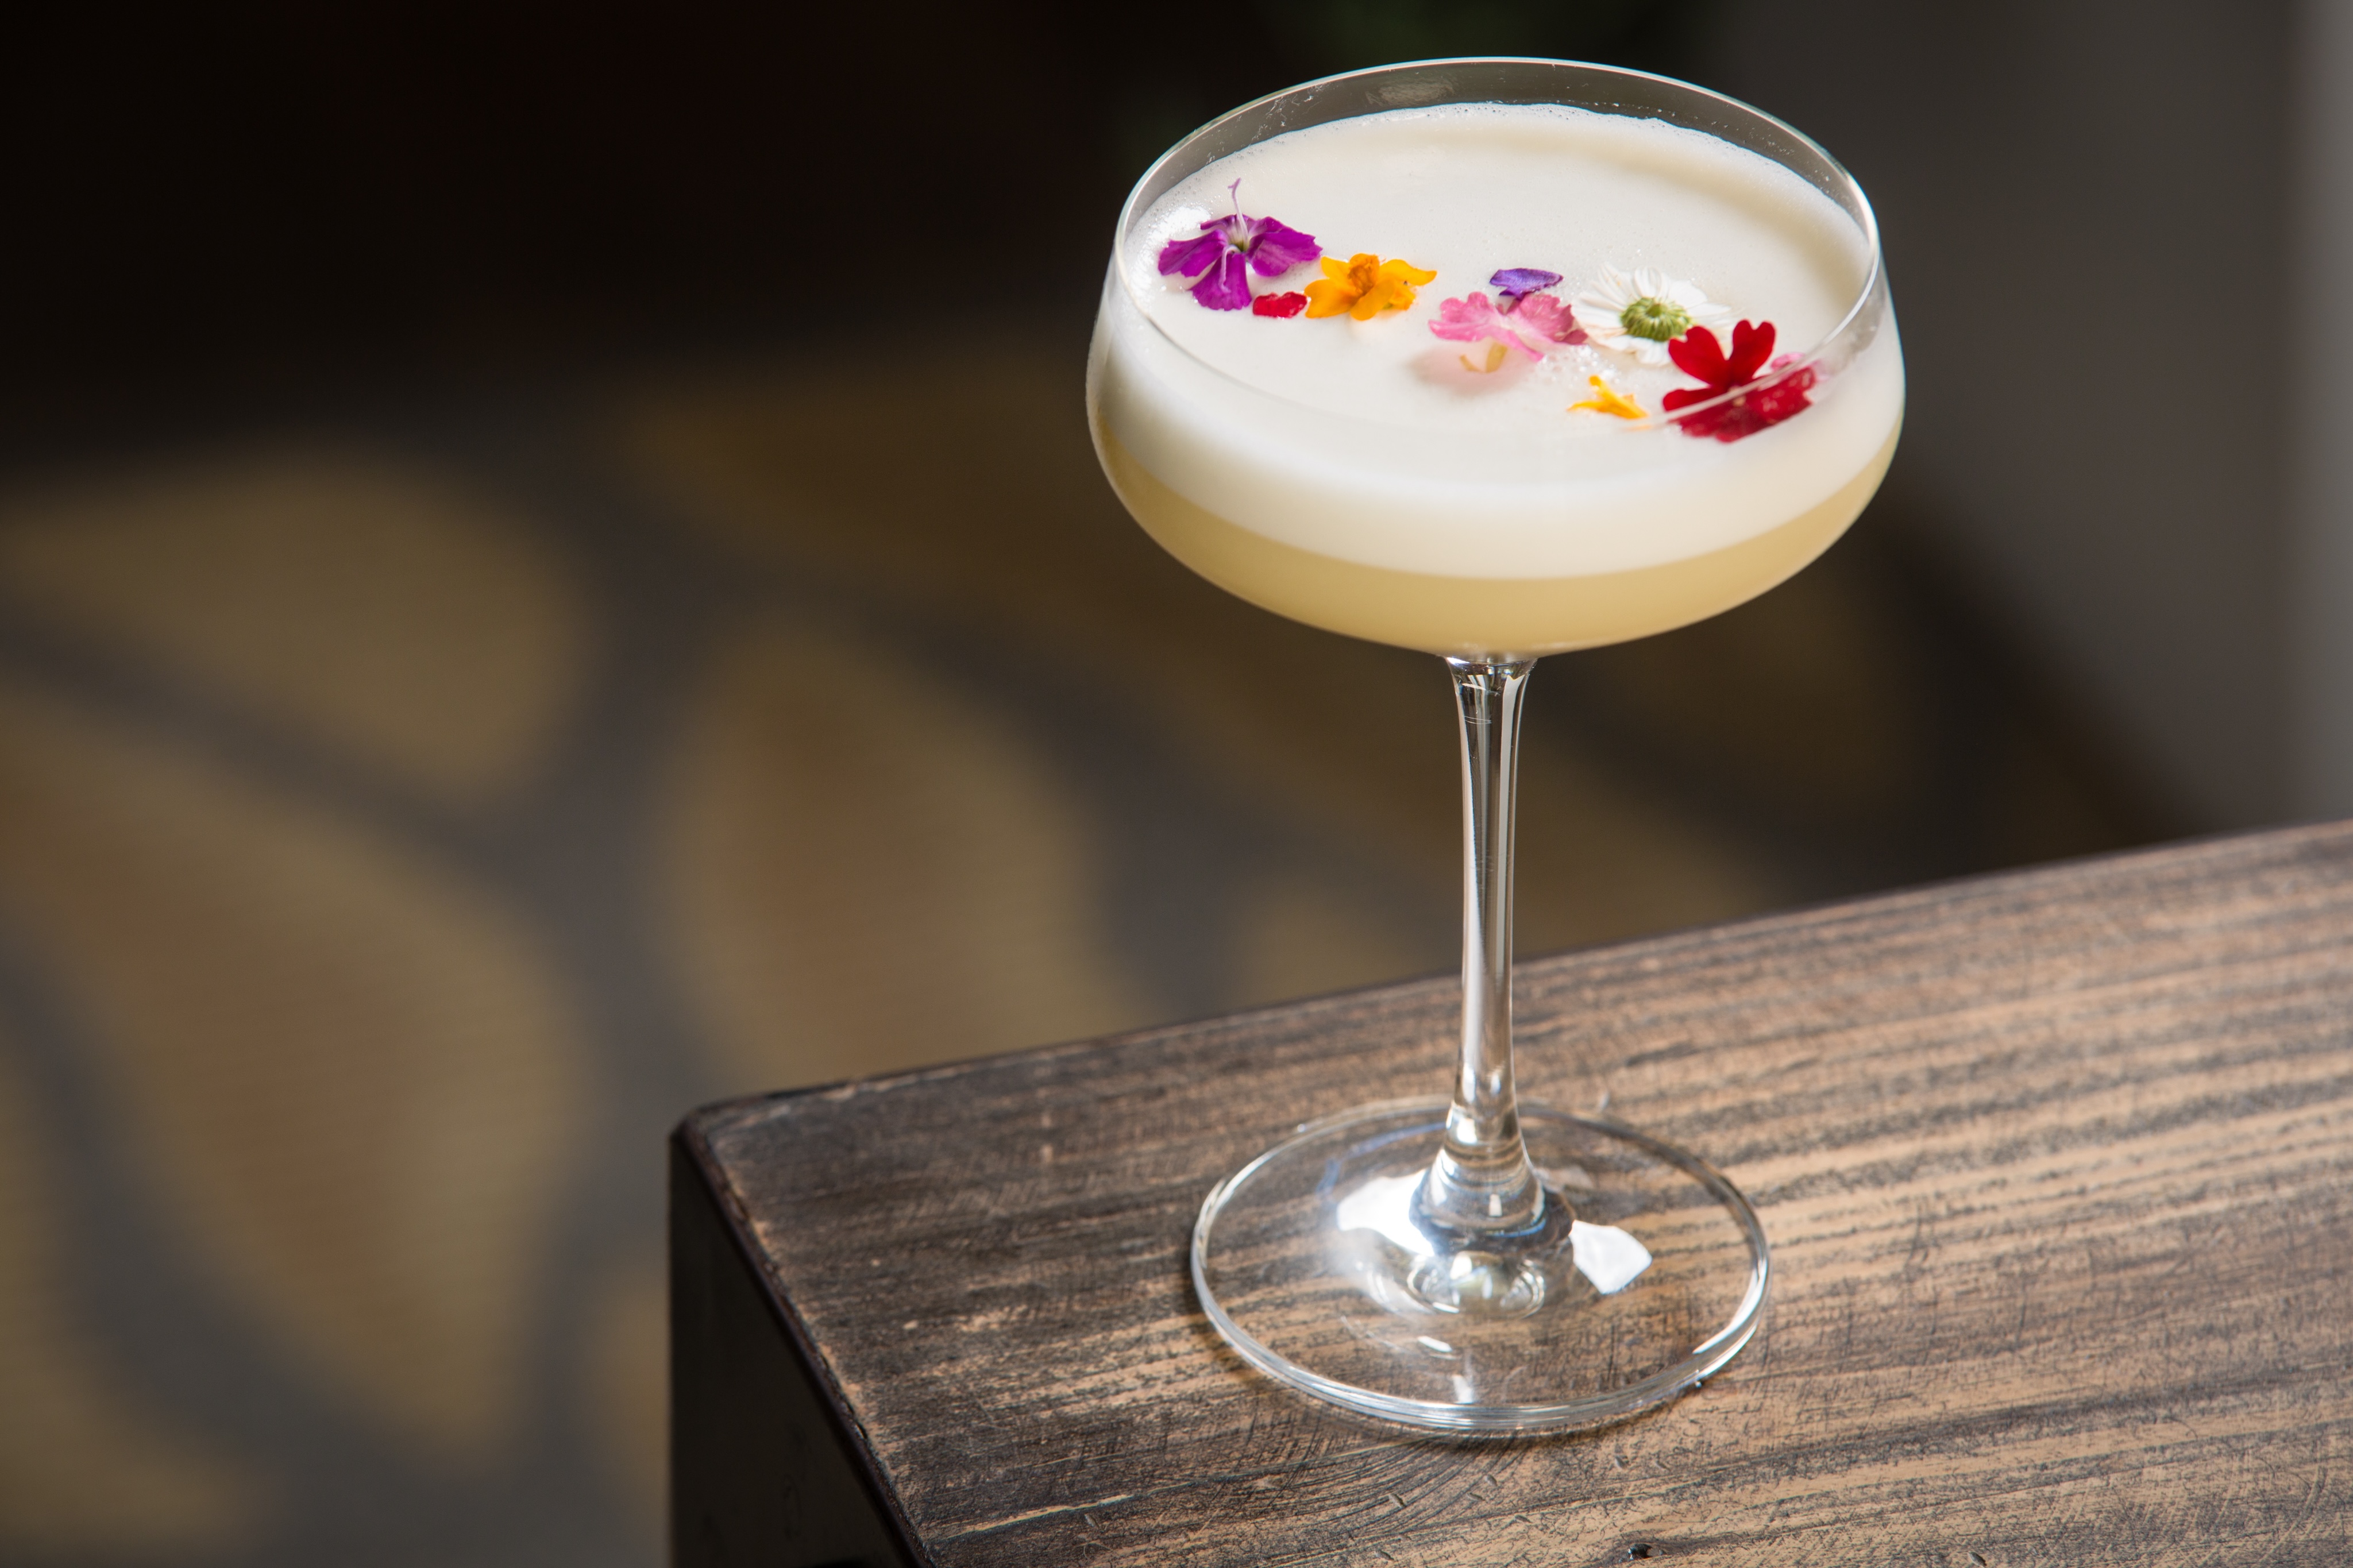 A coupe glass filled with a creamy white cocktail, garnished with colorful edible flowers, placed on a wooden surface - perfect for an enchanting treehouse happy hour.